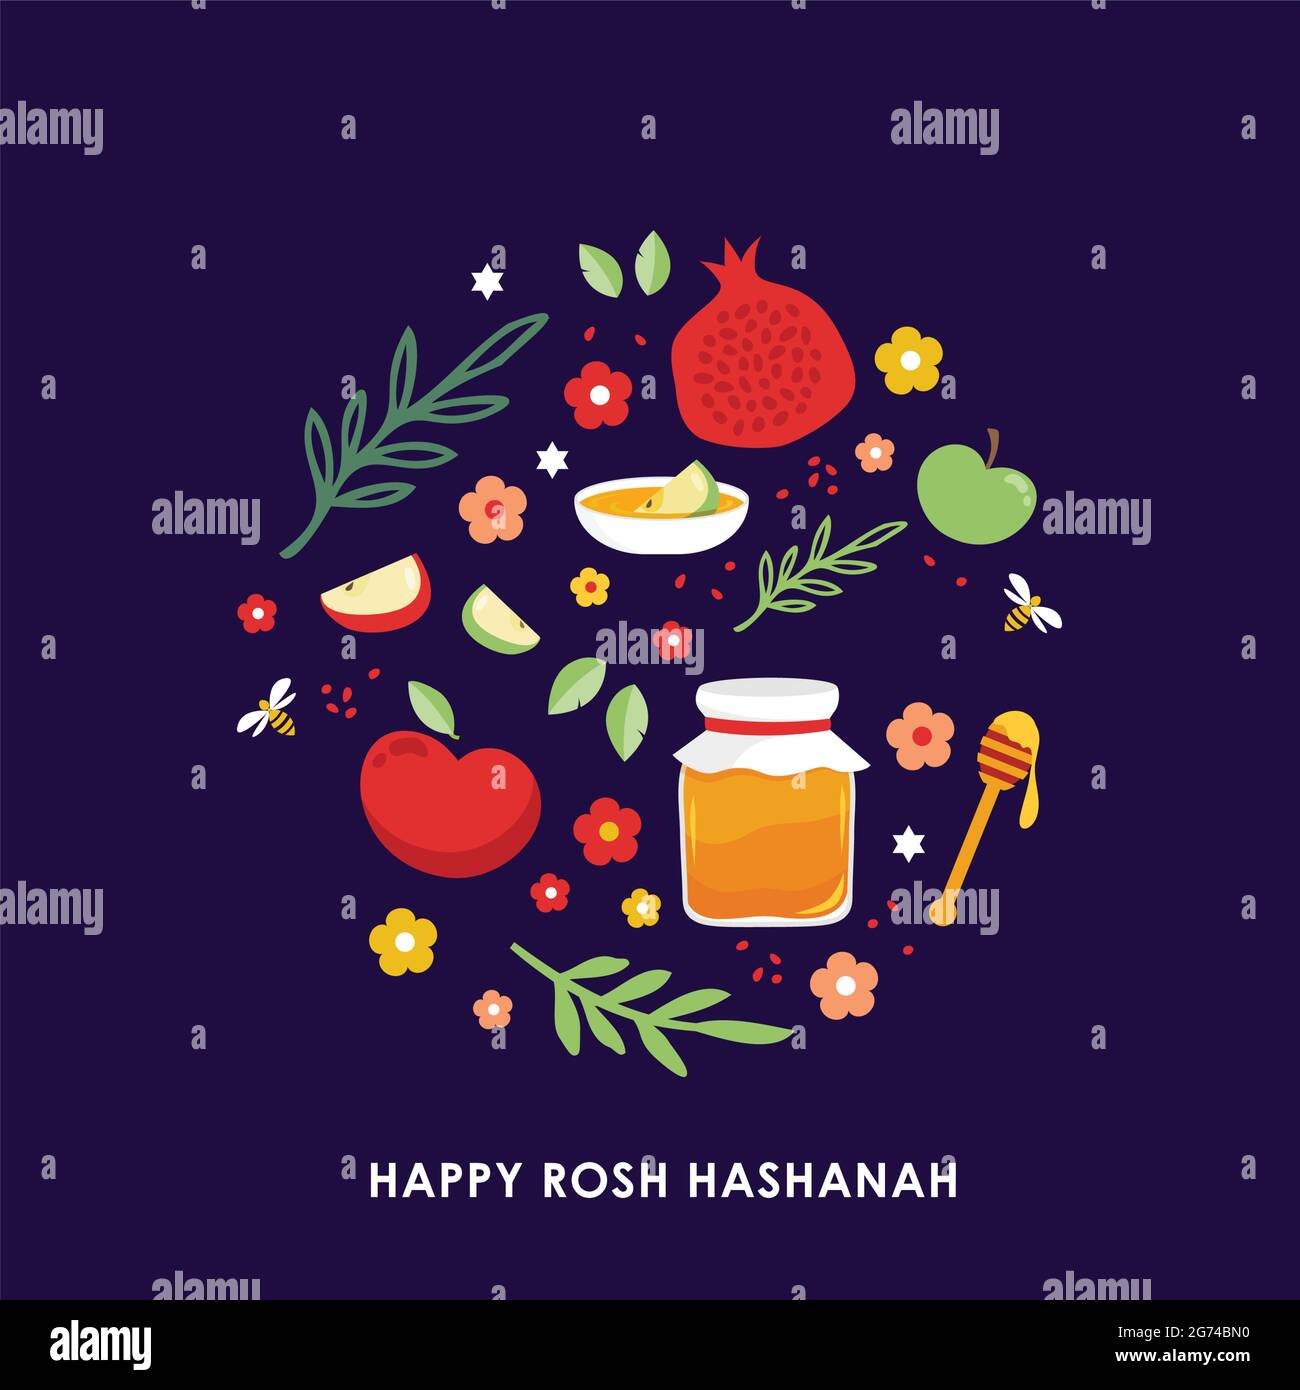 jewish new year, rosh hashanah, greeting card with traditional icons. Happy New Year. Apple, honey, pomegranate, flowers and leaves, Jewish New Year Stock Vector